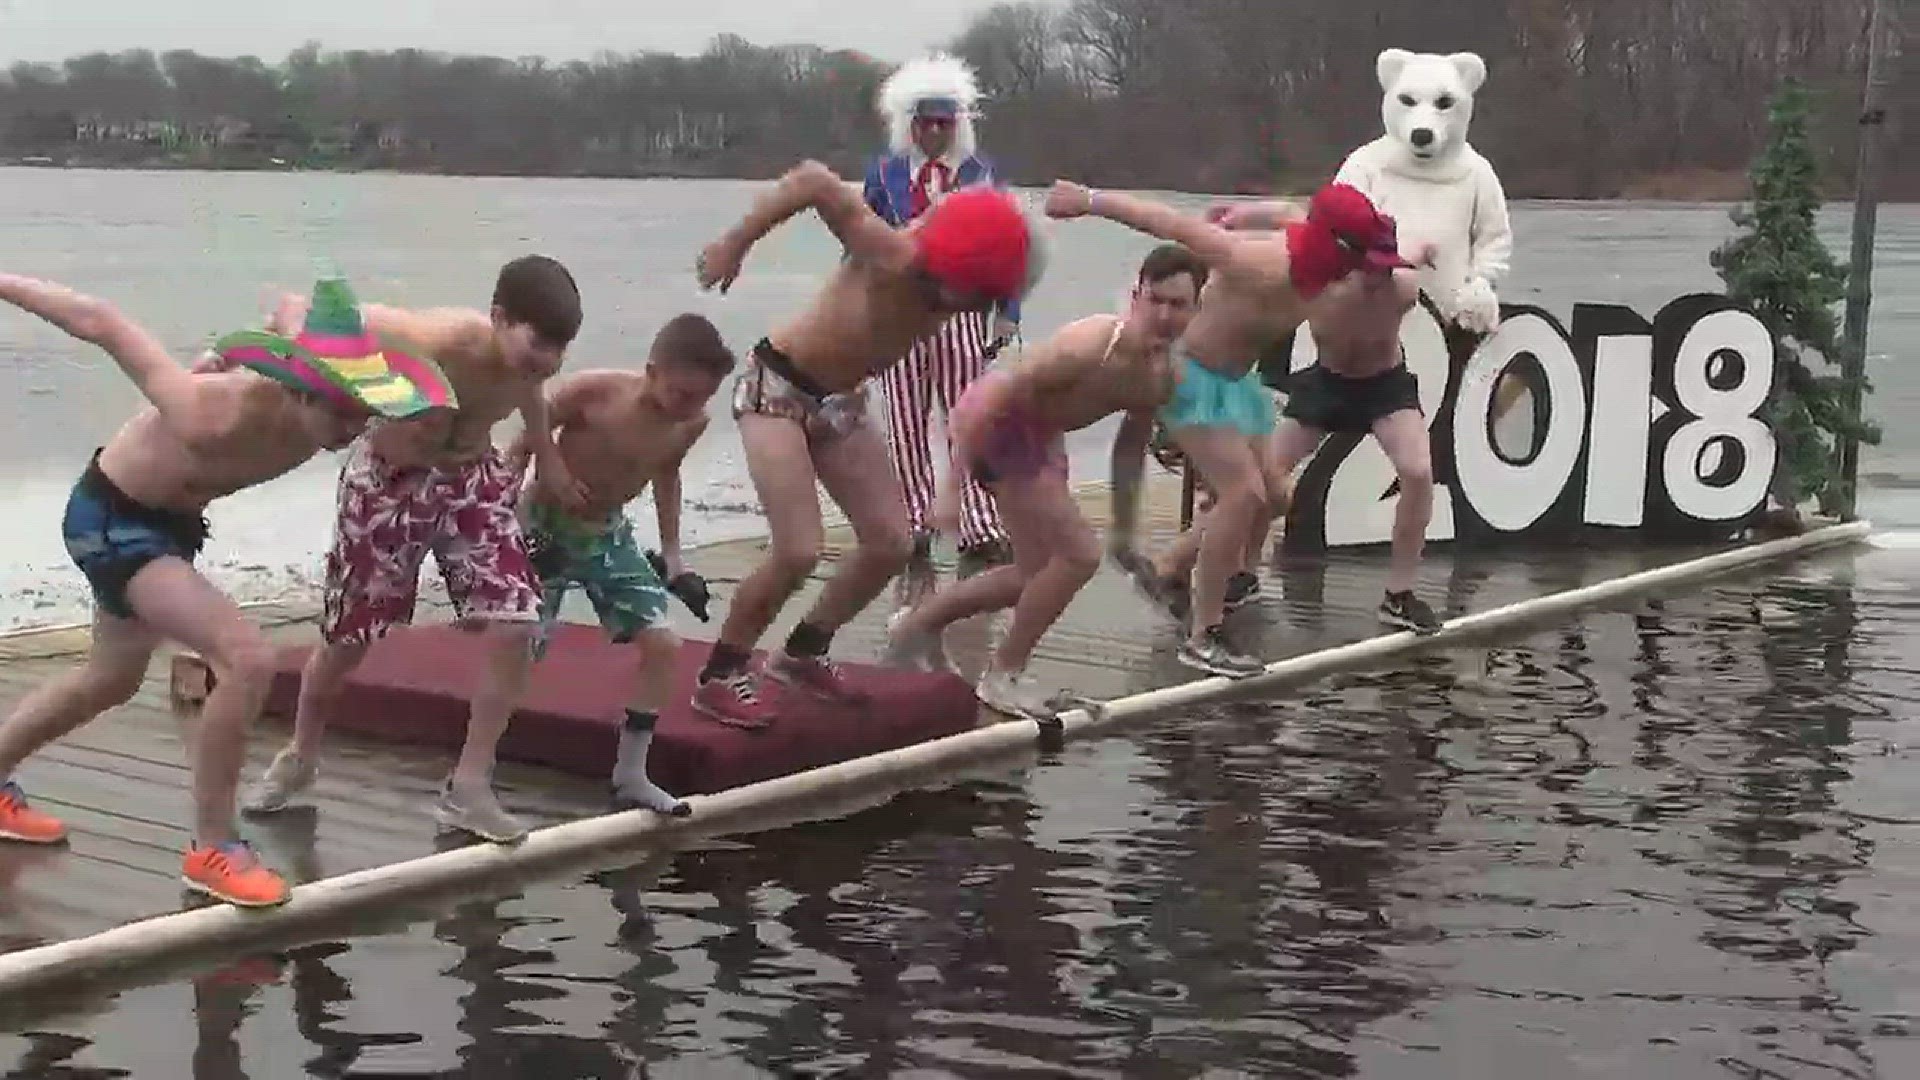 Feb. 17, 2018: More than 750 people traded their winter coats for bathing suits and flip-flops at the 15th Annual Portage Lakes Polar Bear Jump at Portage Lakes State Park. For those skipping traditional beachwear, many adorned their bodies in goofy costu